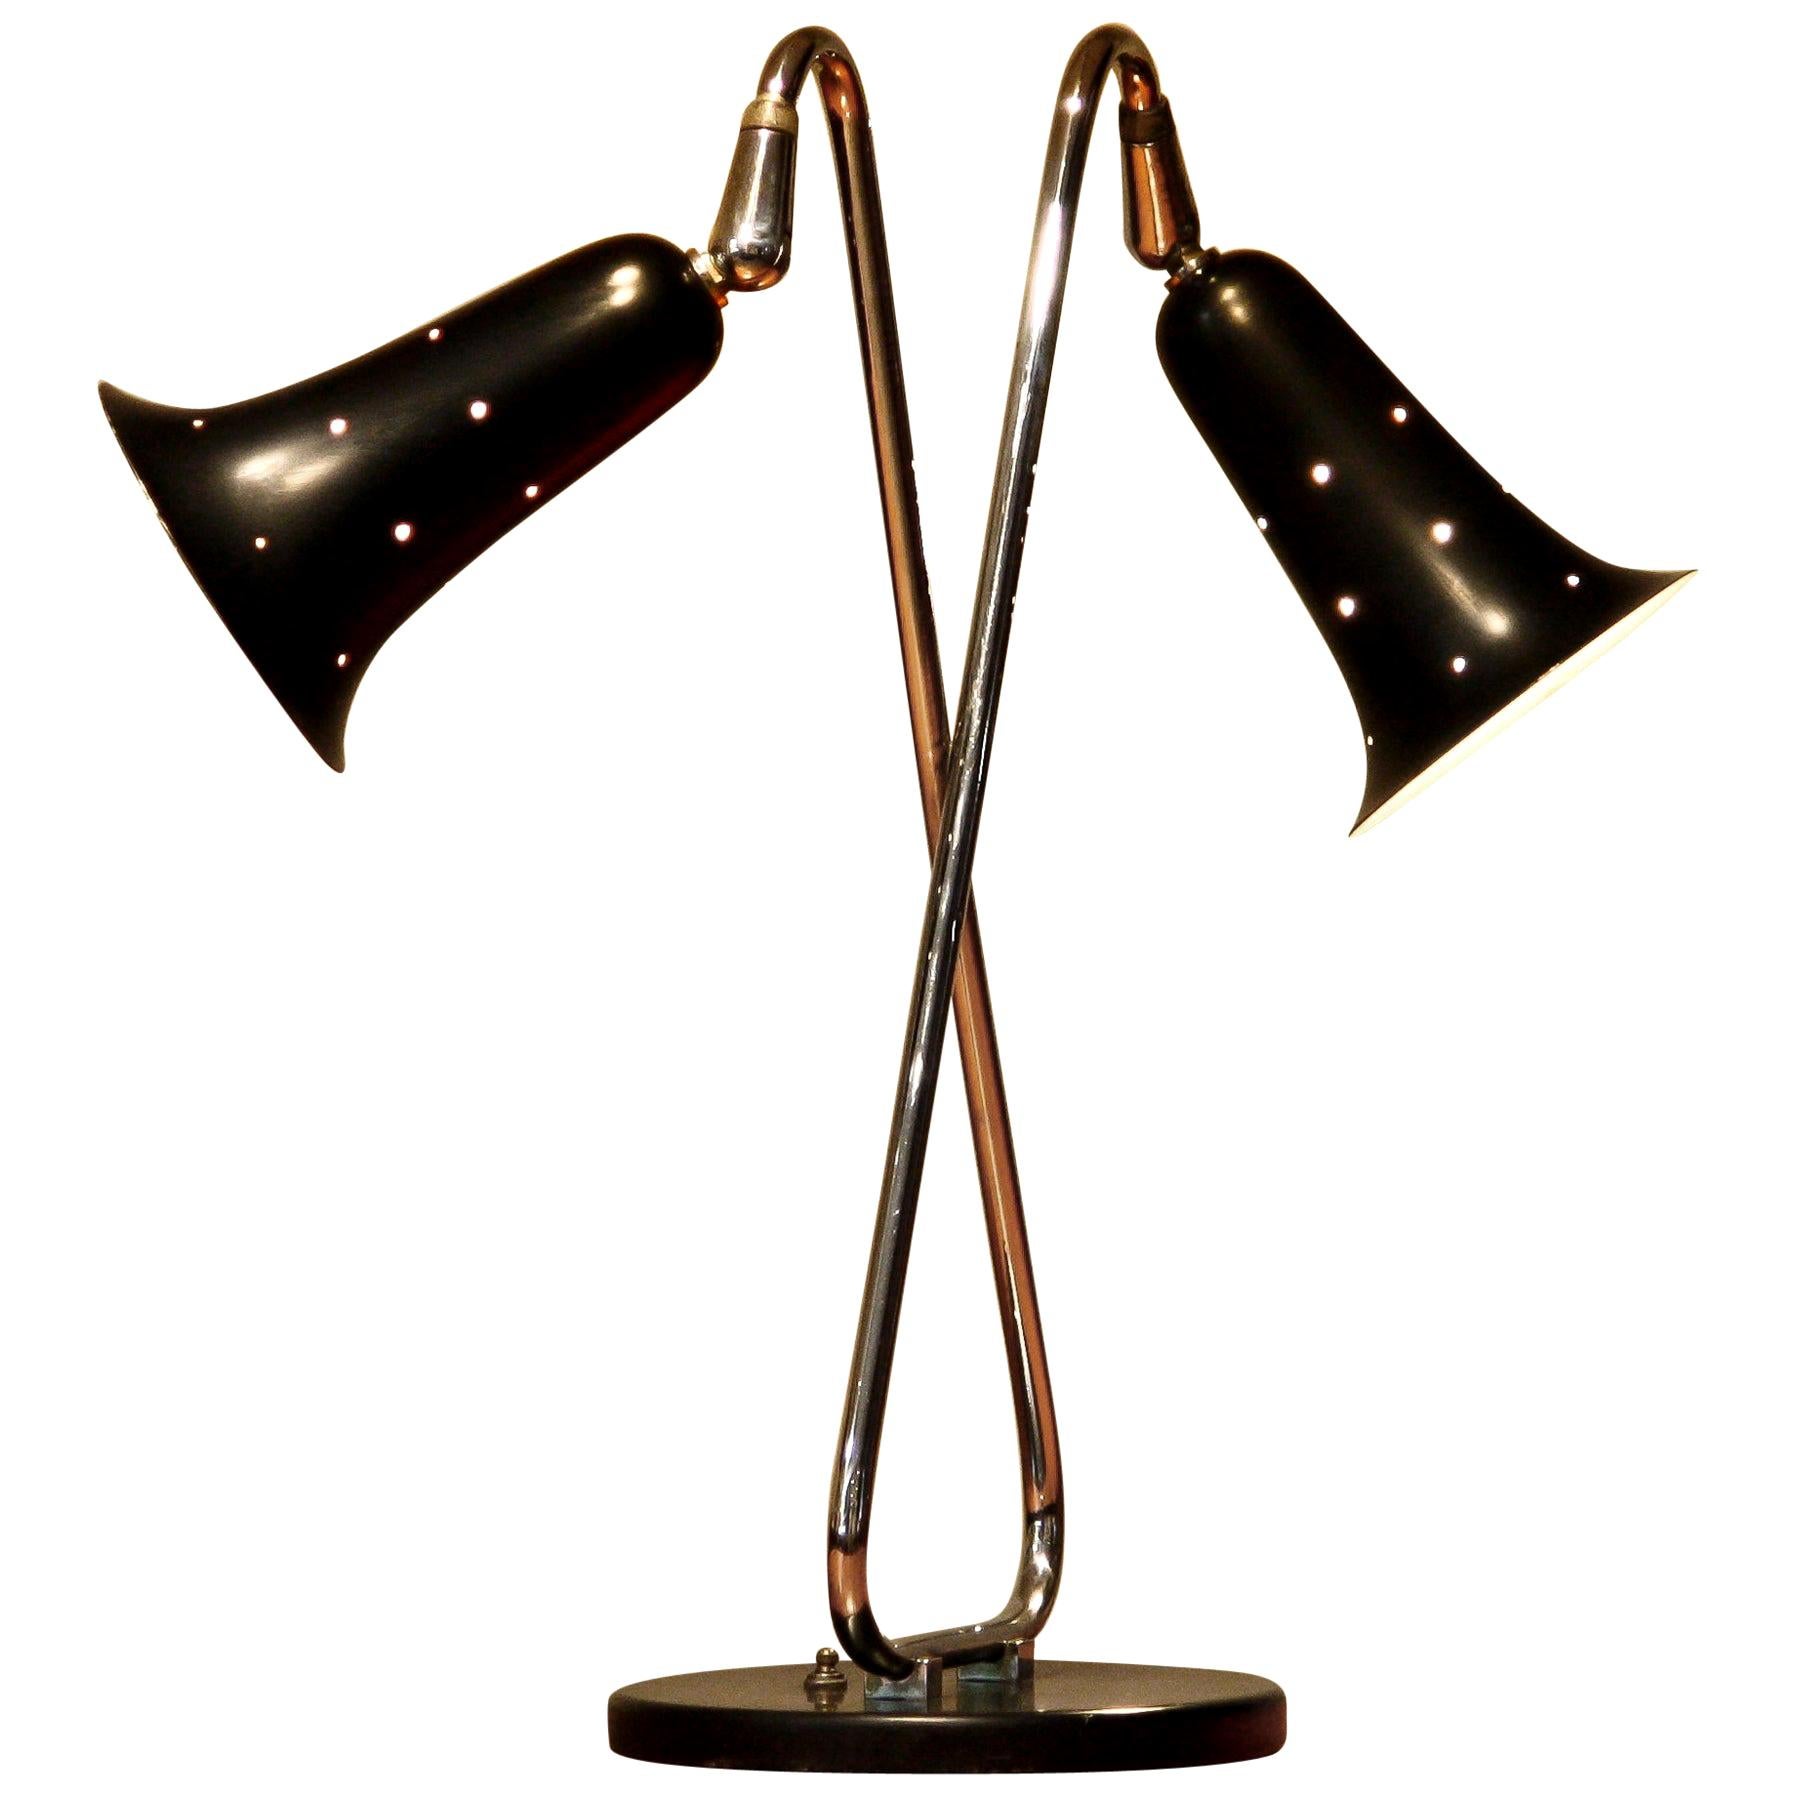 Extremely beautiful black lacquered and chromed metal desk/table lamp, made in the USA, 1950s.
Technically 100% and in good and original condition. Two bulbs E26 / E27 size.
Period 1950s.
The dimensions for the shades are: ø14 cm / 5.5 inch, H.18